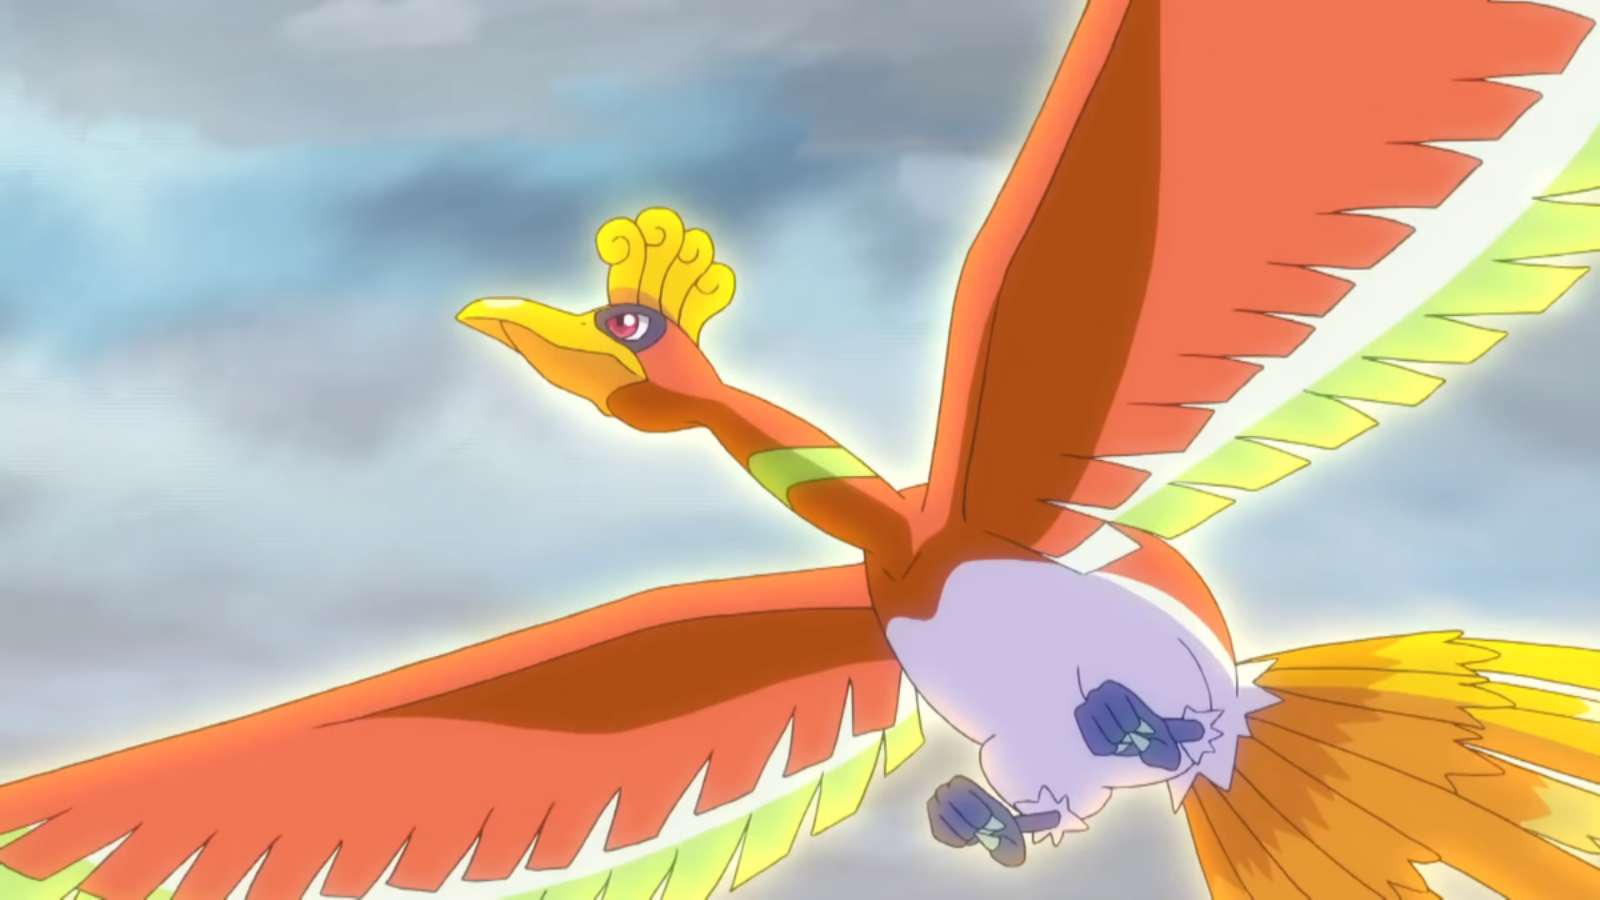 The Pokemon Ho-Oh in the anime